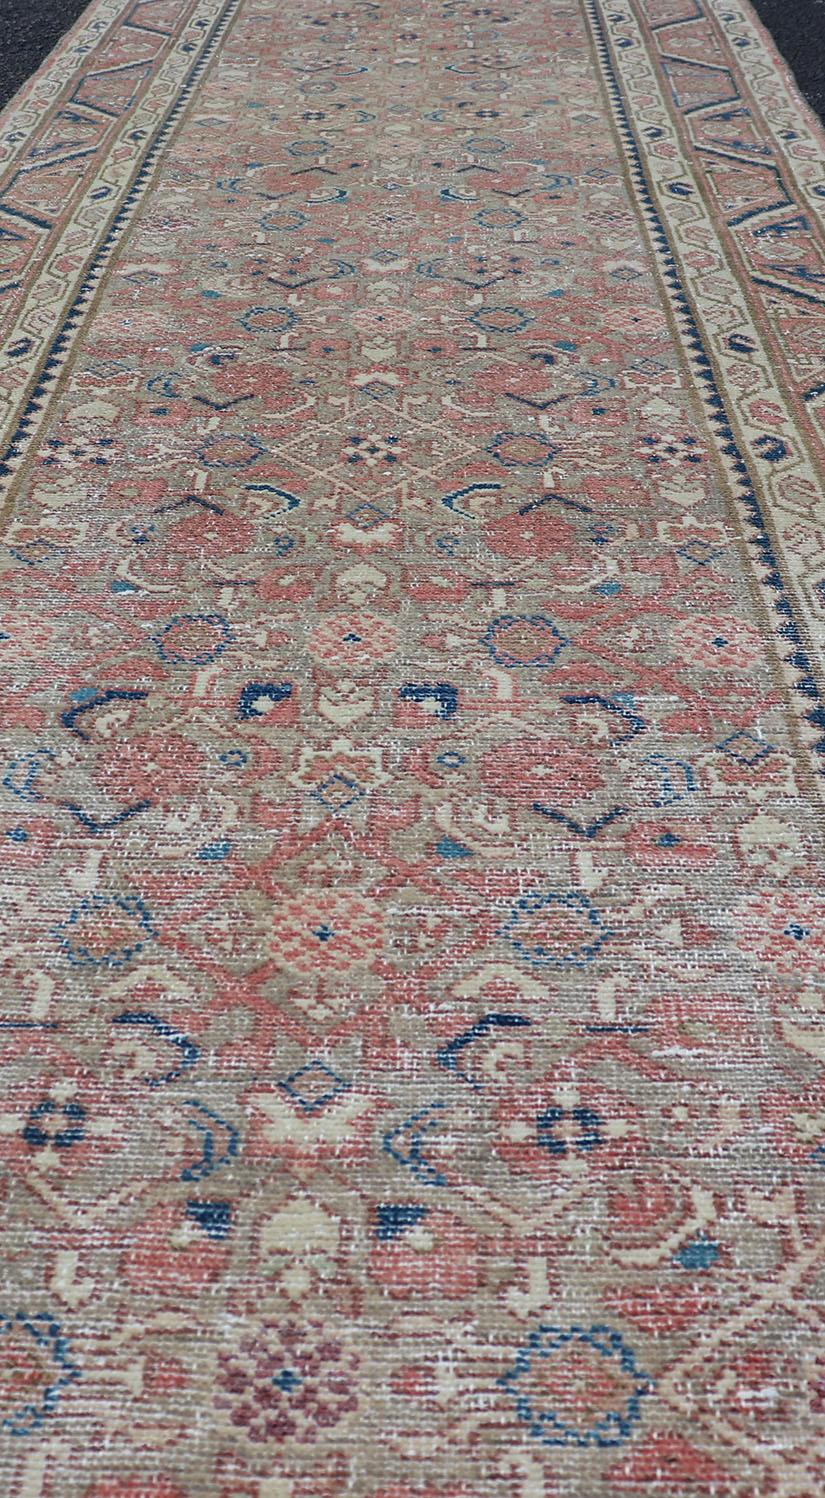 Wool Antique Persian Malayer Runner in Tones of Blue, Salmon, Cream, and Tans For Sale